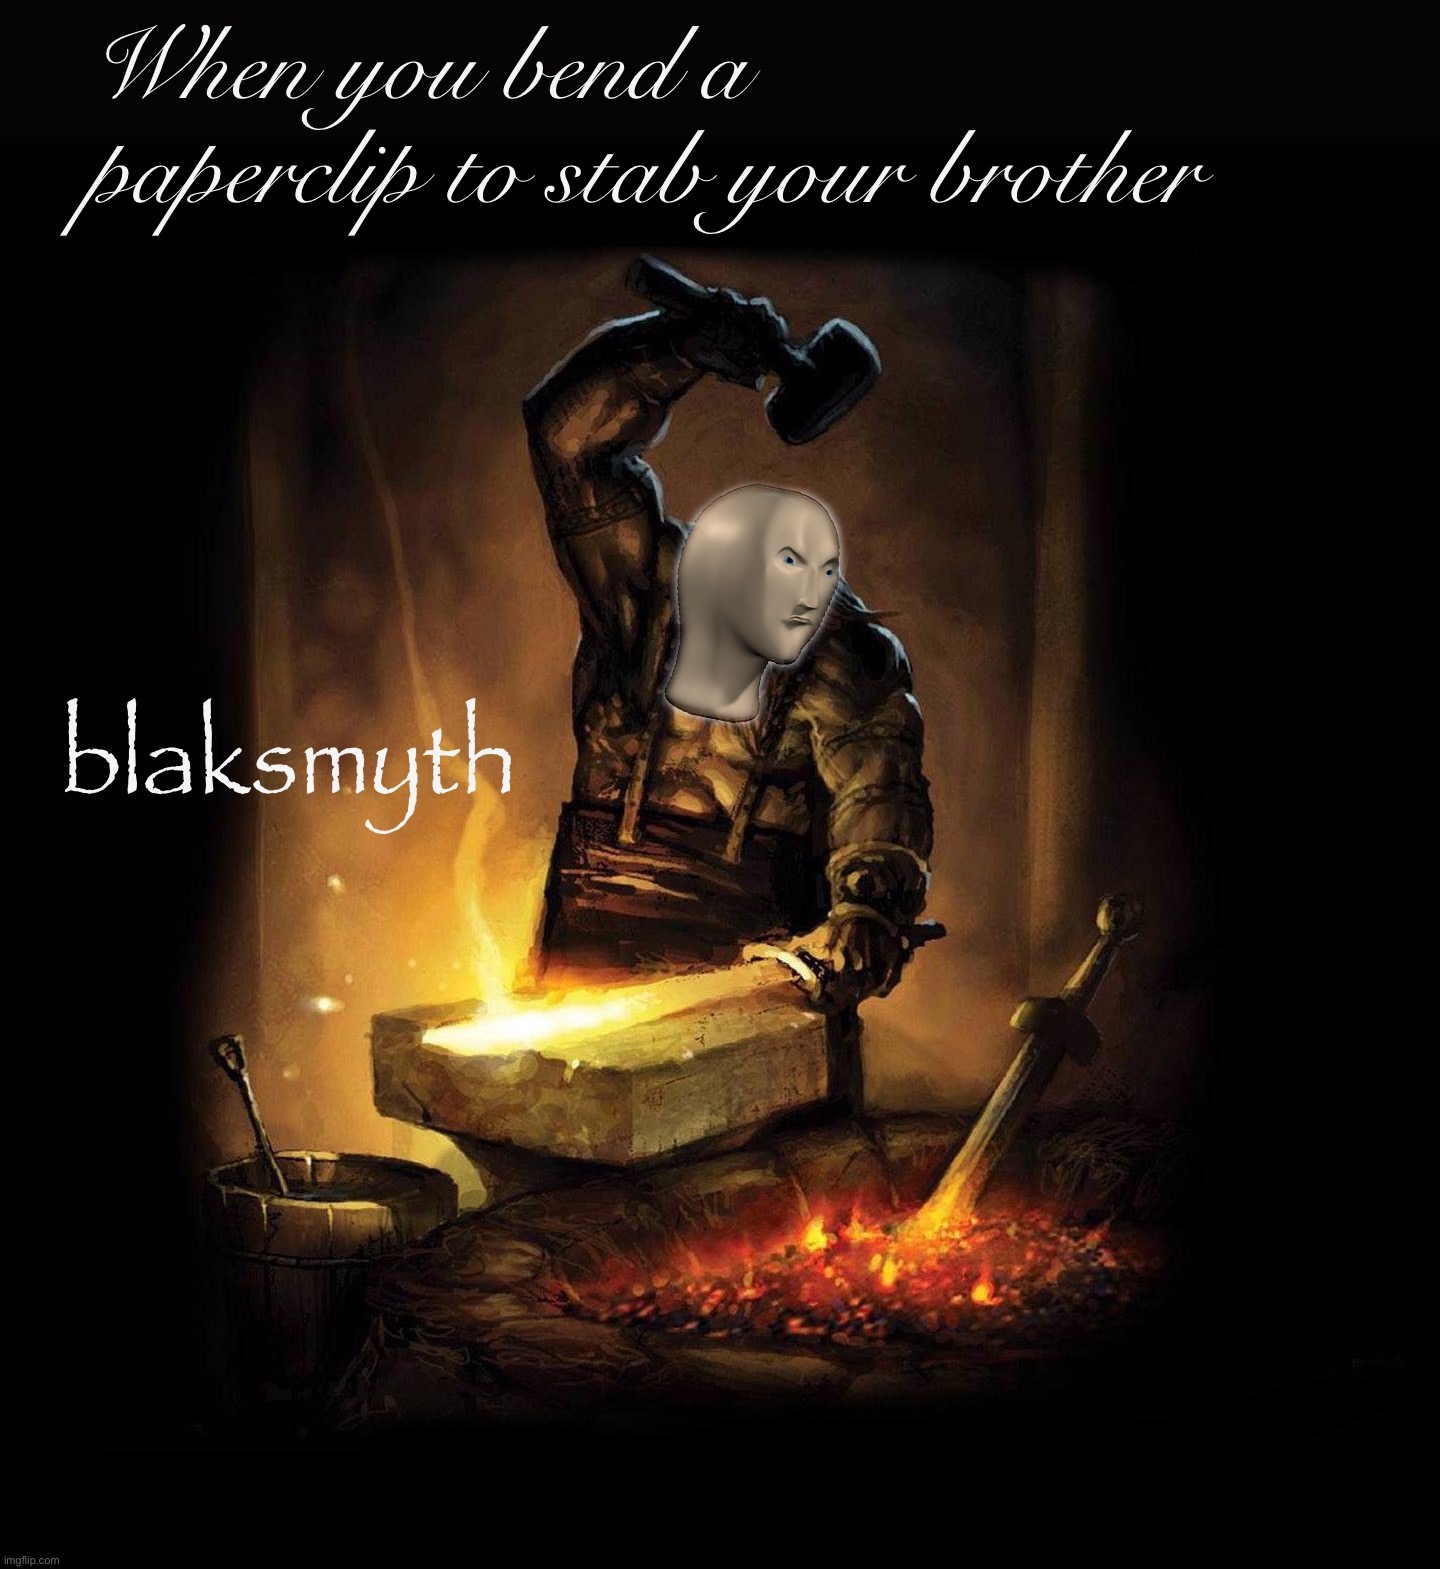 Meme man blaksmyth |  When you bend a paperclip to stab your brother | image tagged in meme man blaksmyth | made w/ Imgflip meme maker